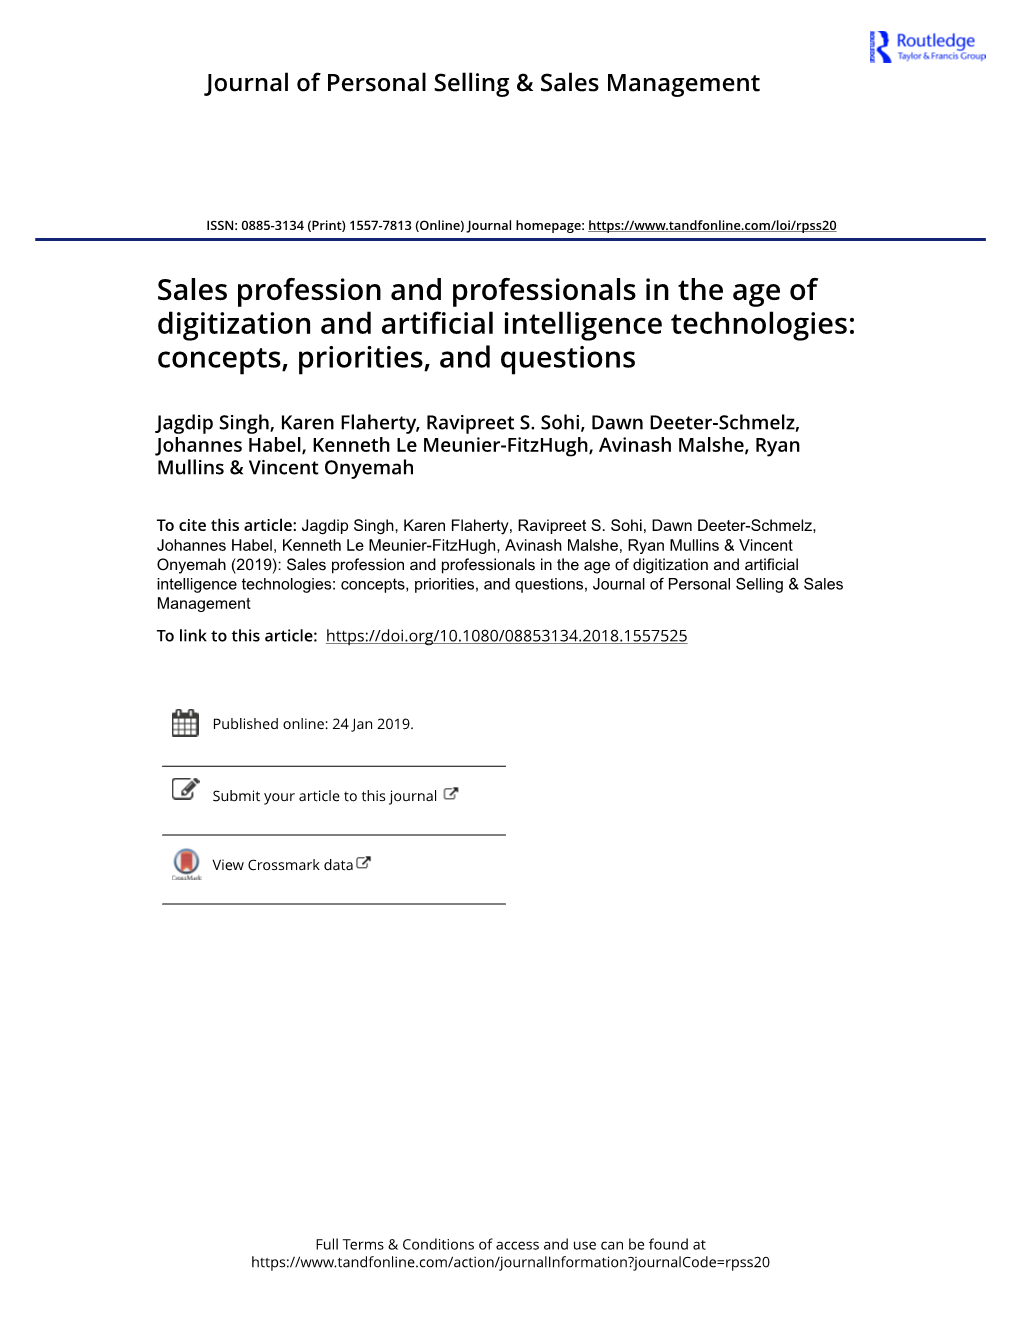 Sales Profession and Professionals in the Age of Digitization and Artificial Intelligence Technologies: Concepts, Priorities, and Questions